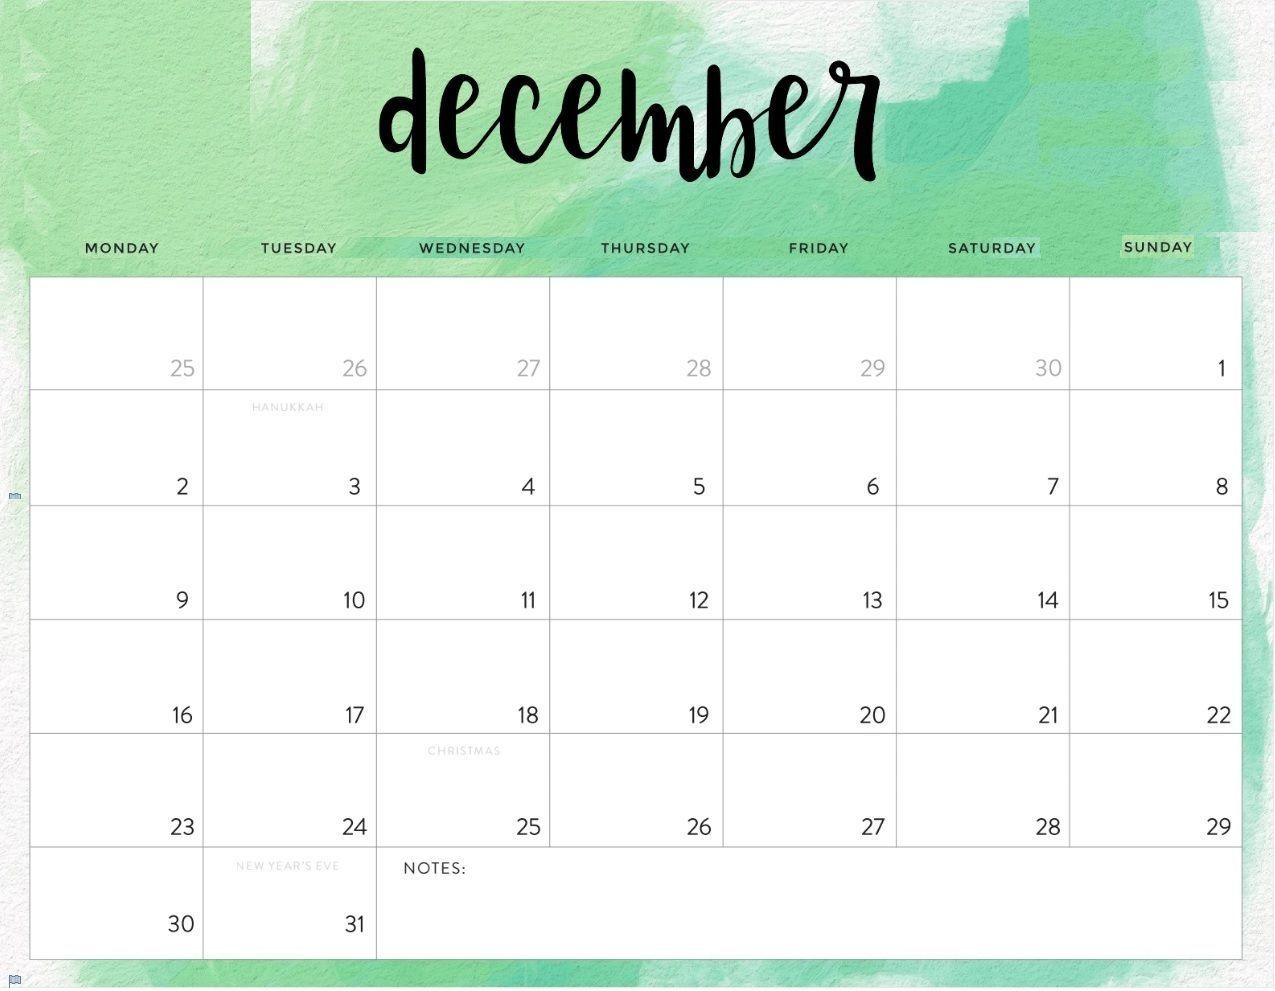 calendars you can edit online 9